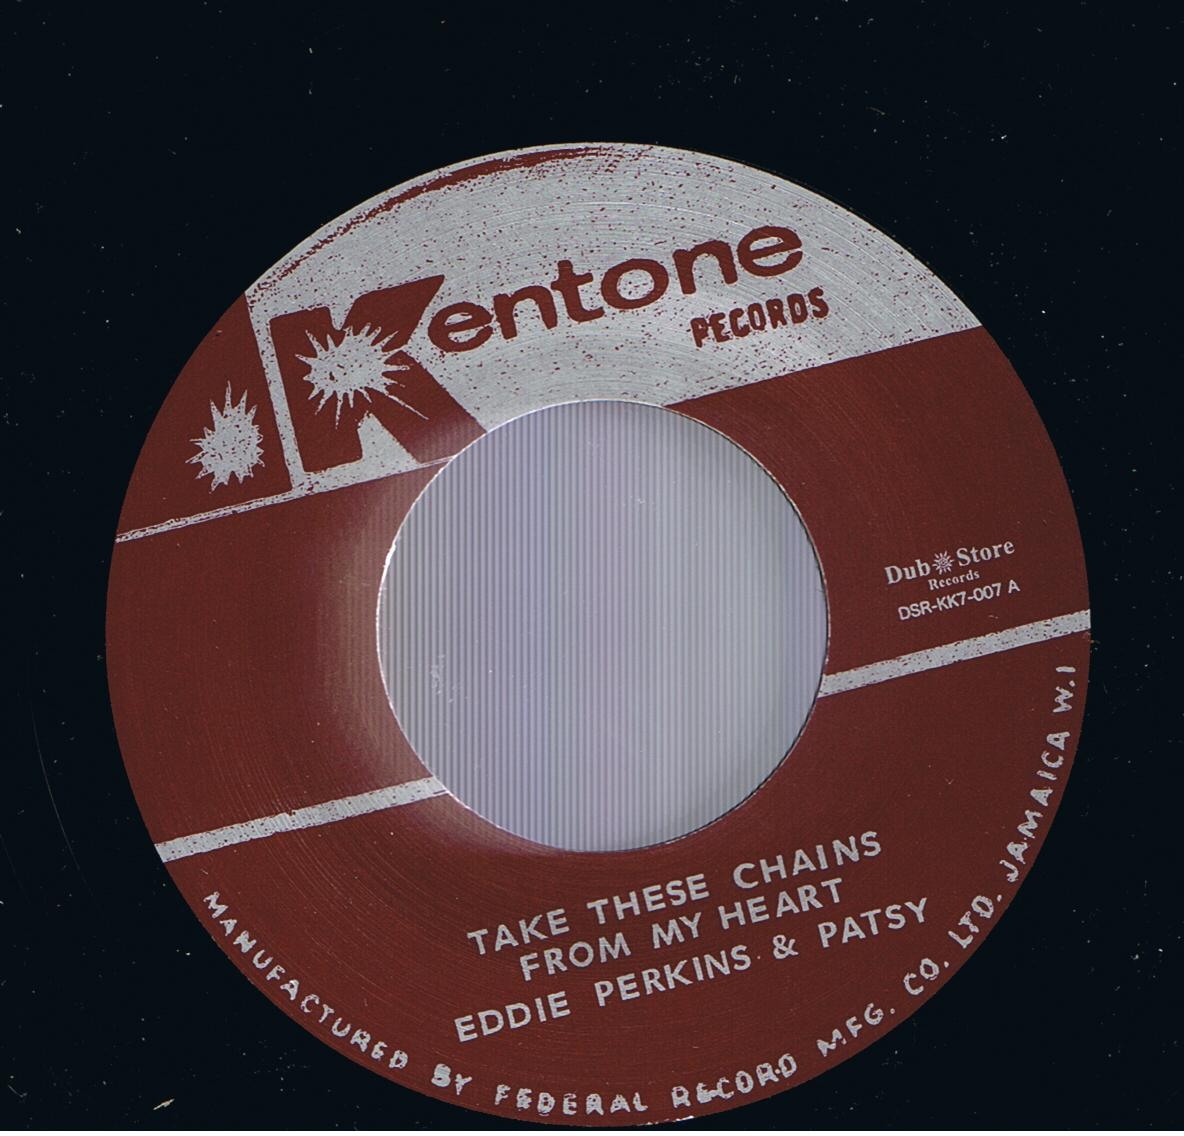 Eddie Perkins & Patsy - Take These Chains From My Heart / Eddie Perkins - I Am Blue (7")